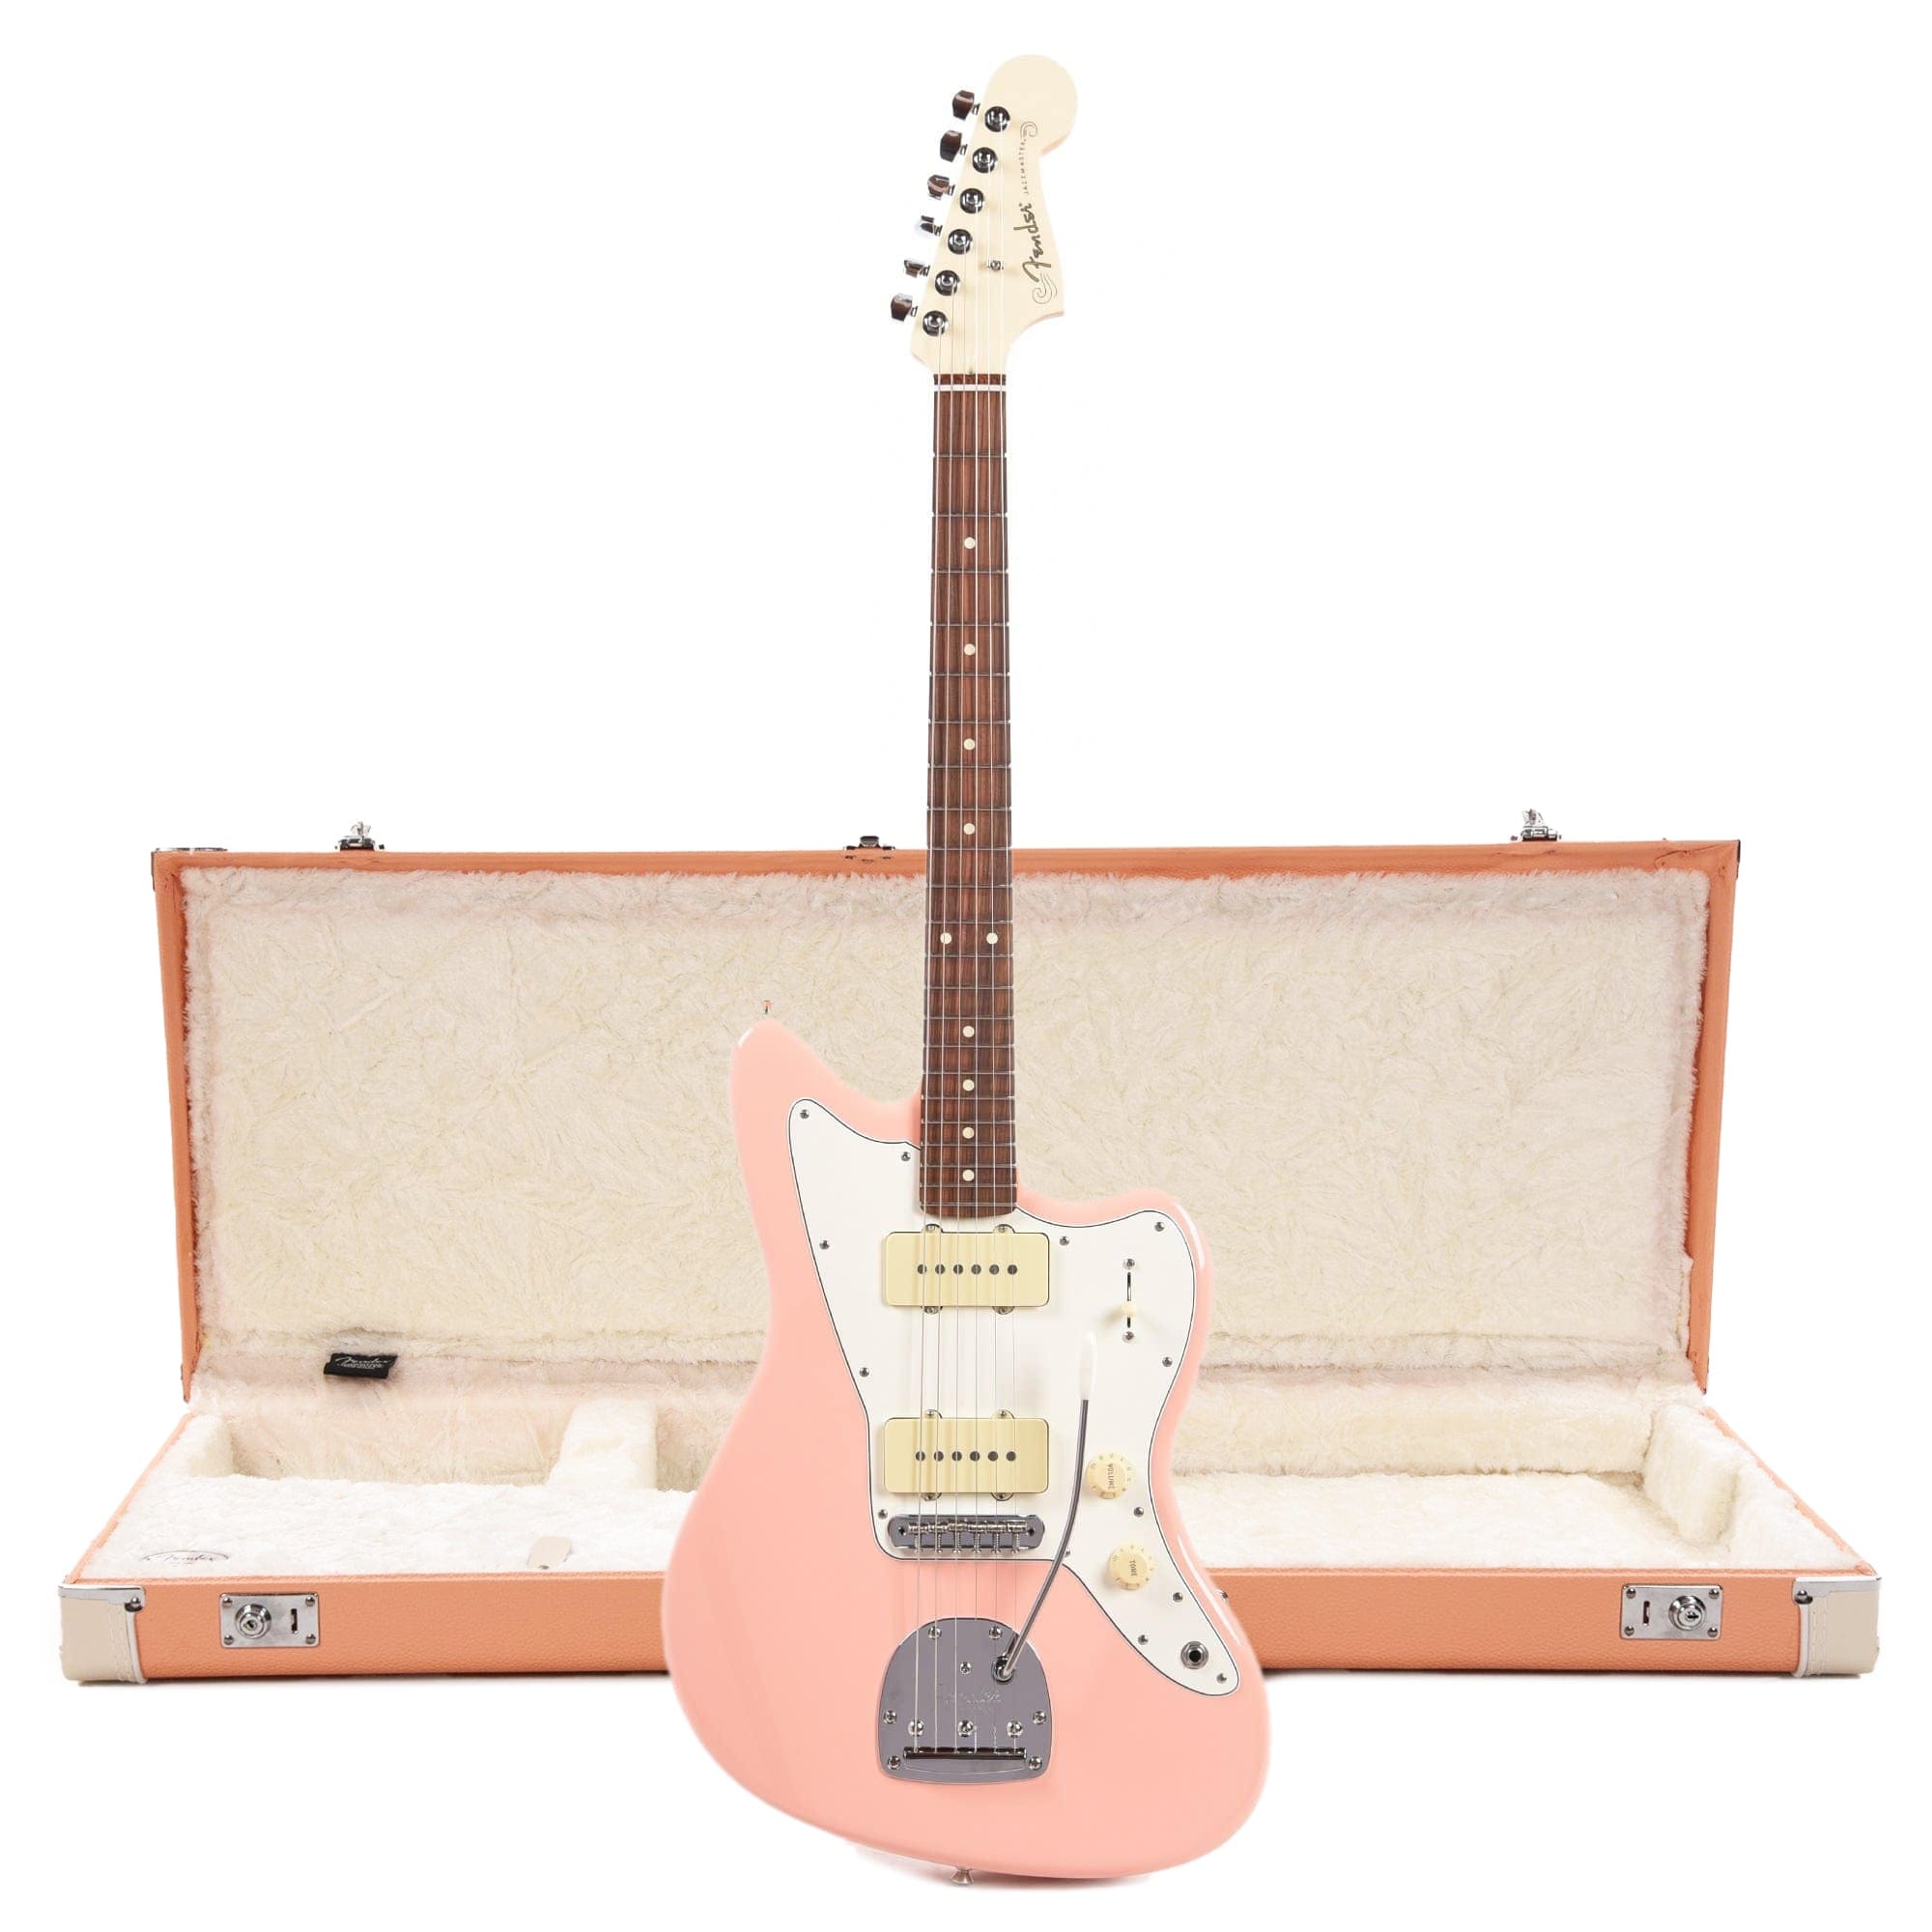 Fender Player Jazzmaster Shell Pink w/Olympic White Headcap, Pure Vintage  '65 Pickups, & Series/Parallel 4-Way and Classic Series Wood Case Pacific  